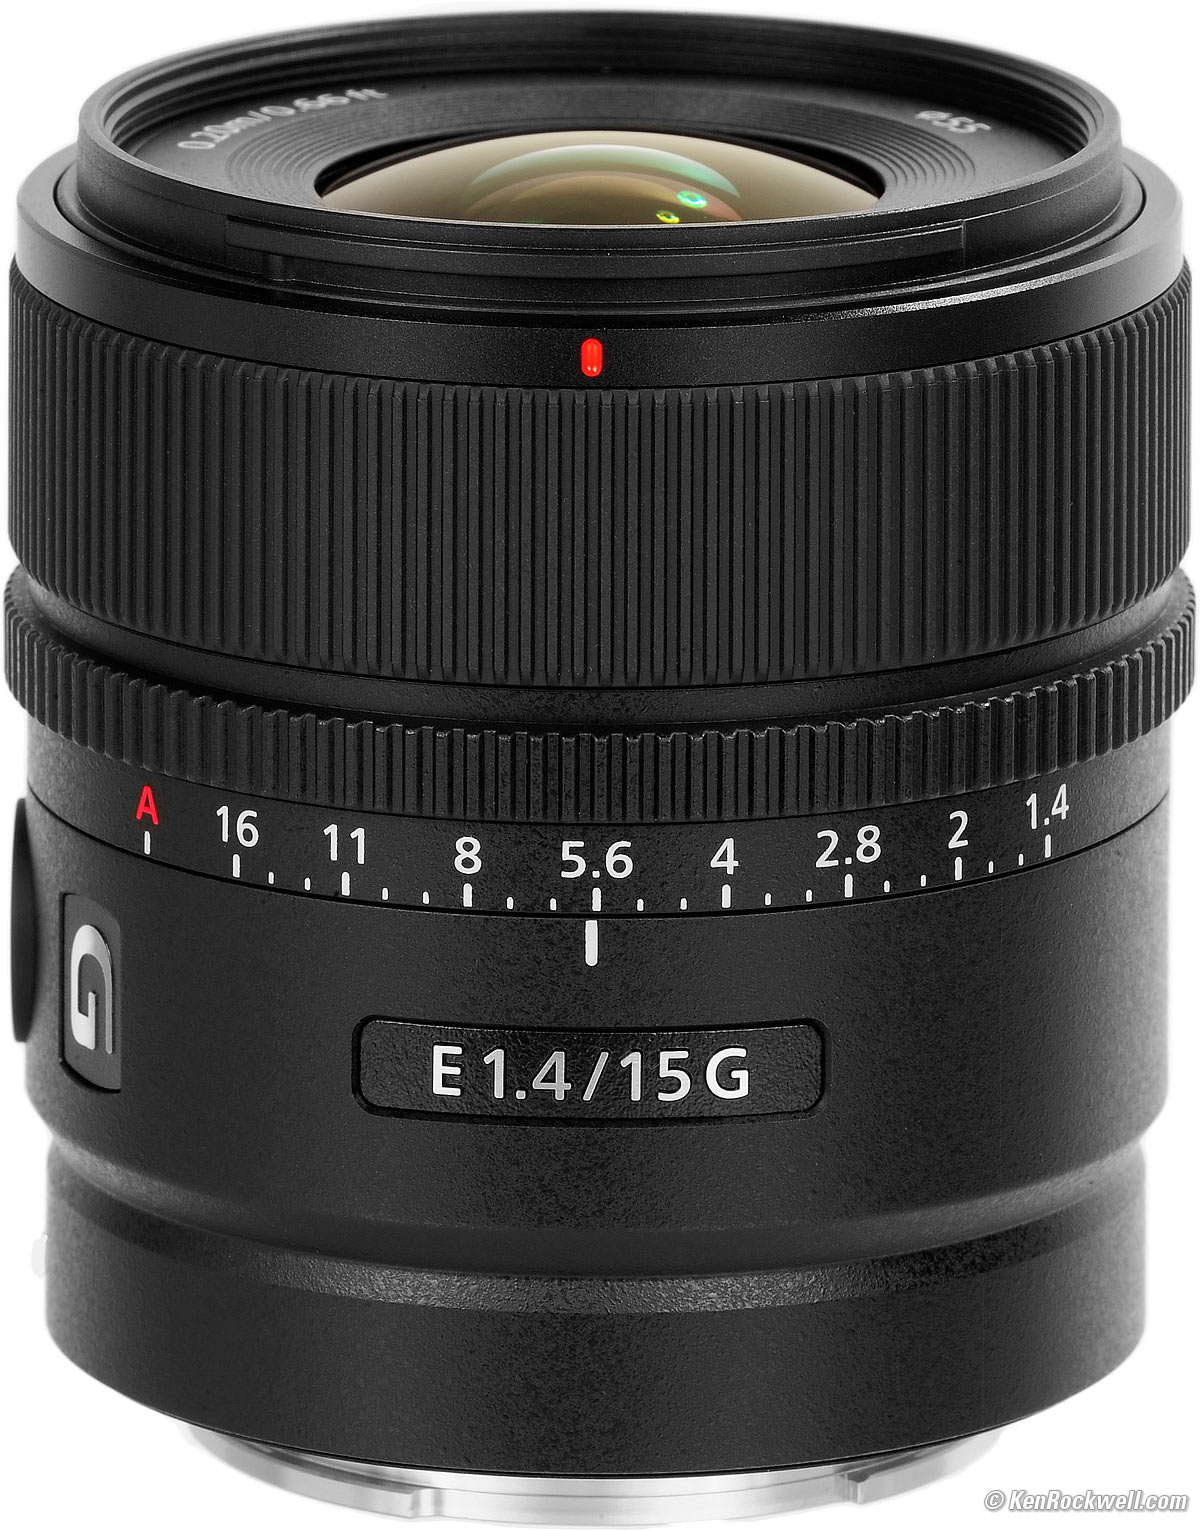 Sony E 15mm f/1.4 G Review & Sample Images by Ken Rockwell